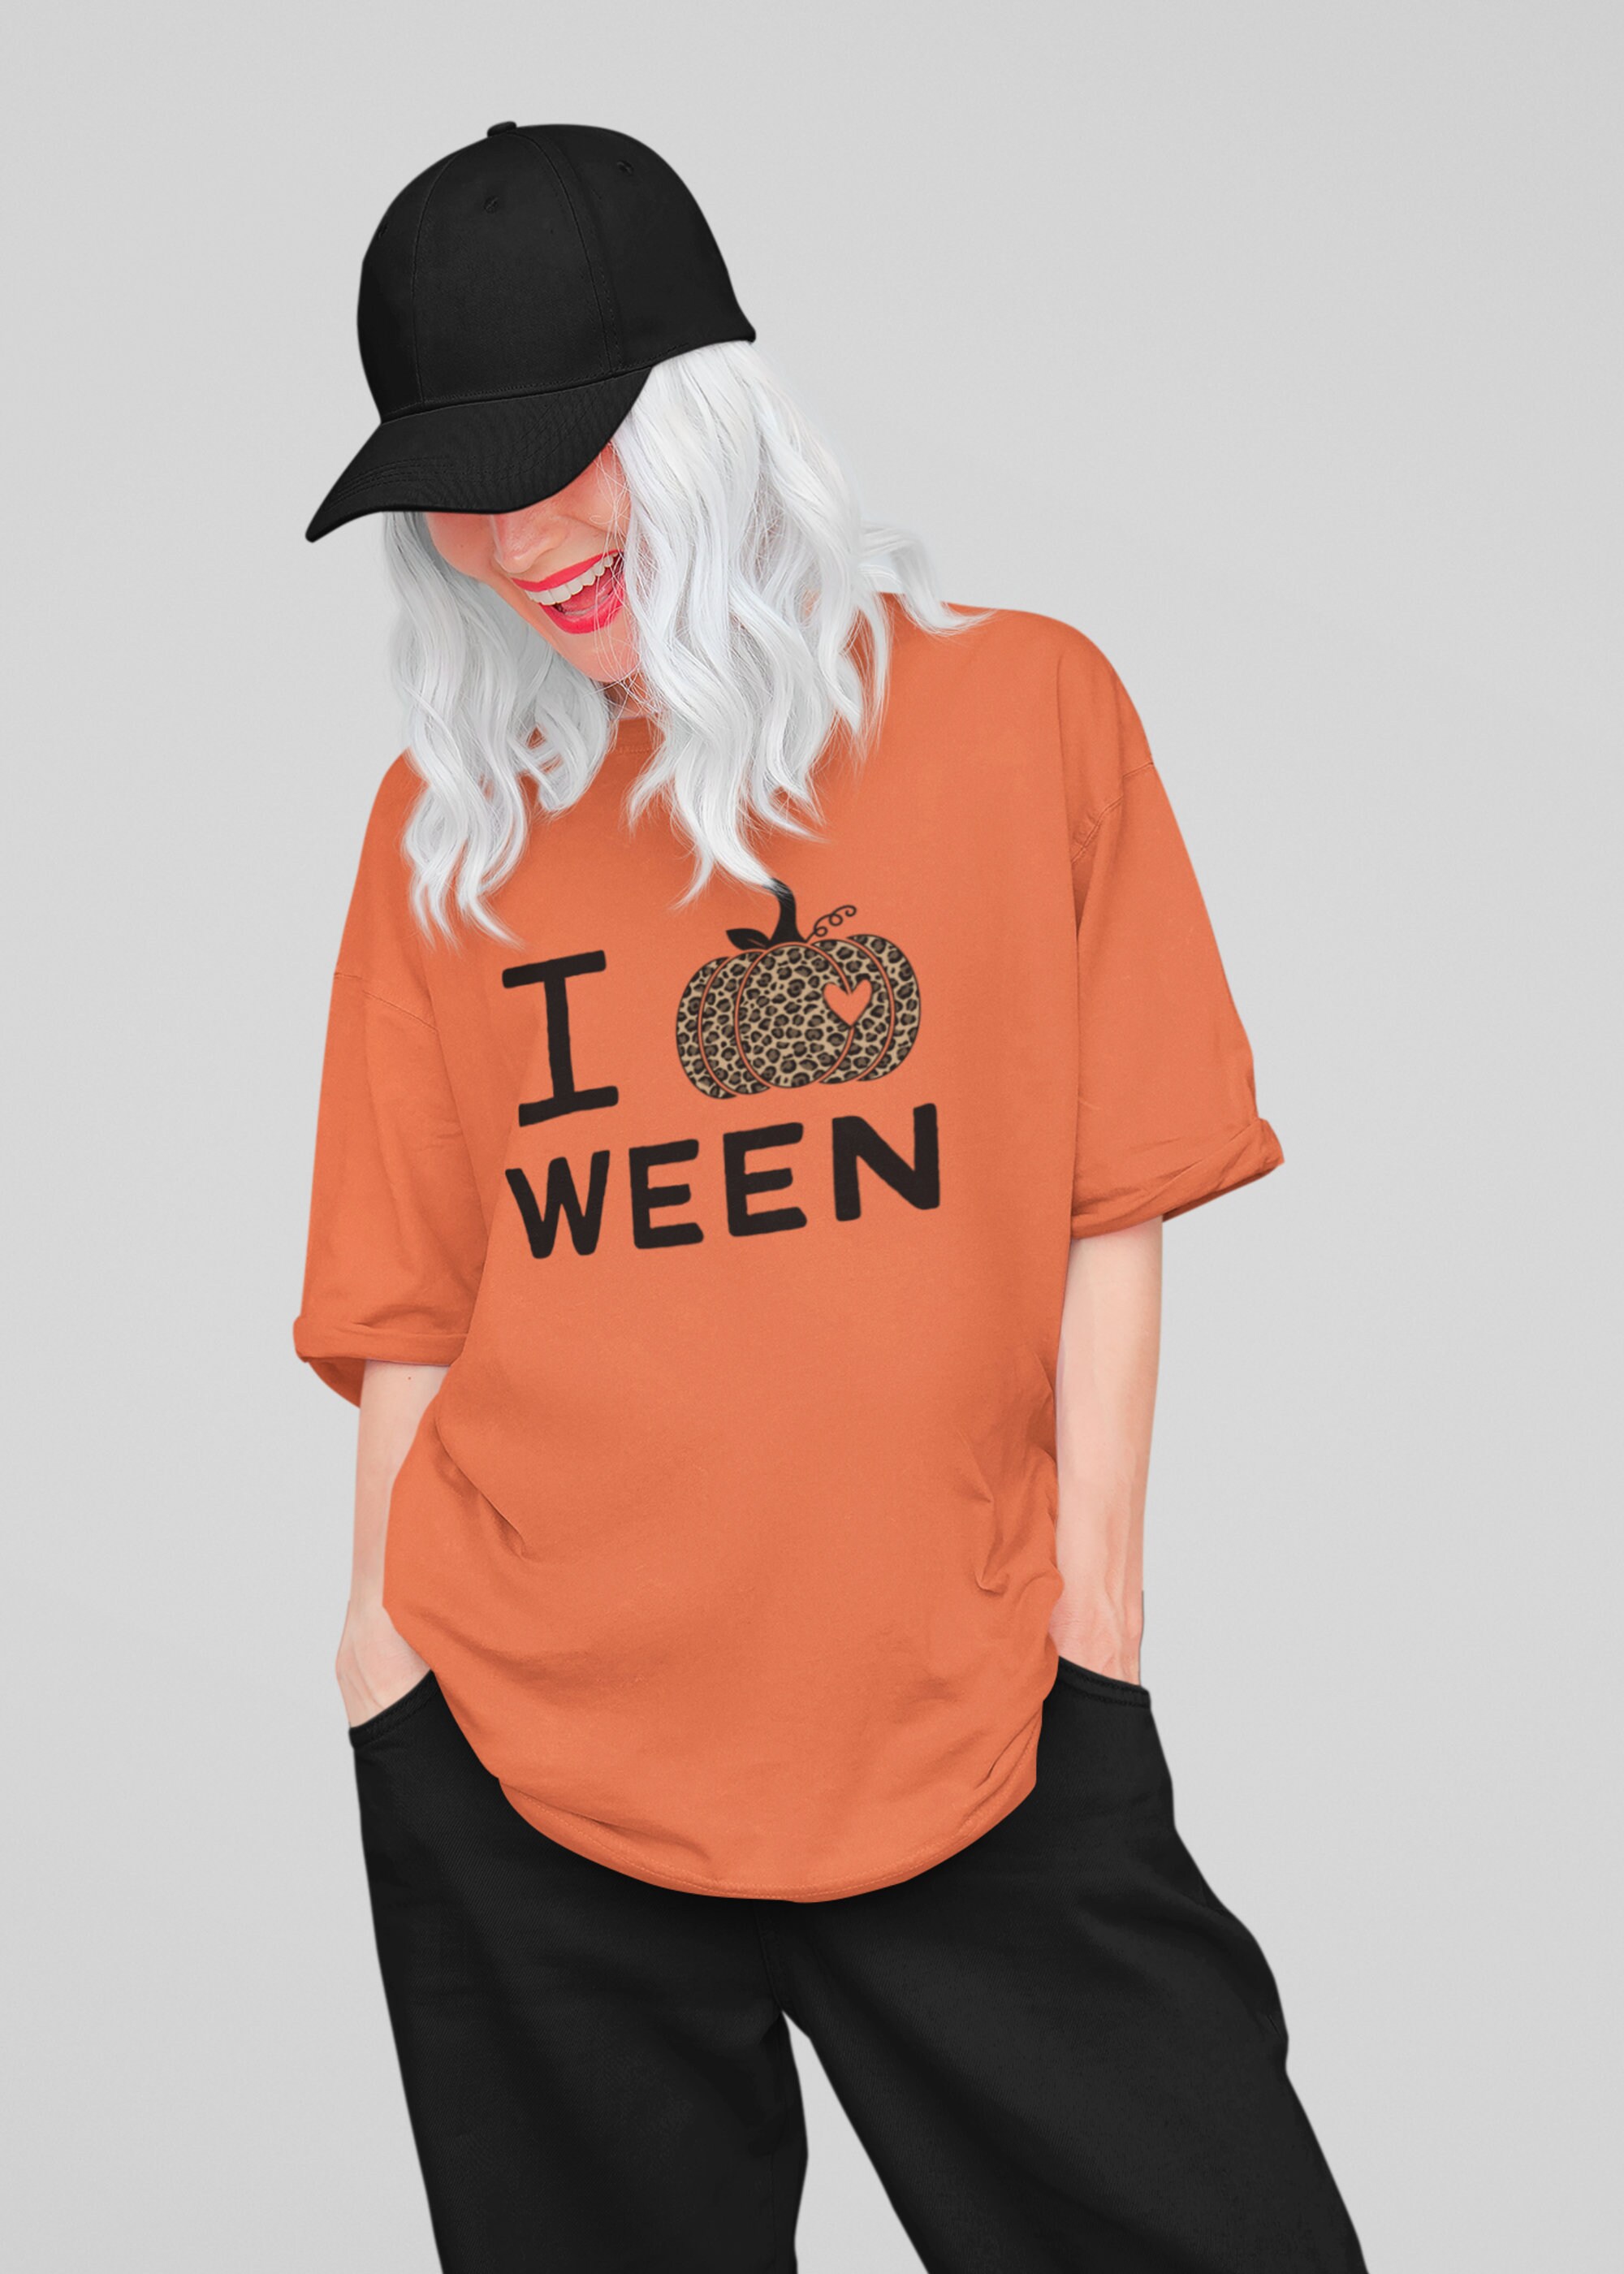 Discover Halloween Lover T-Shirt - Graphic Tee with Leopard Graphic Heart Pumpkin - October 31 Shirt - I <3 Ween Fall Humor Innuendo - Beige Autumn